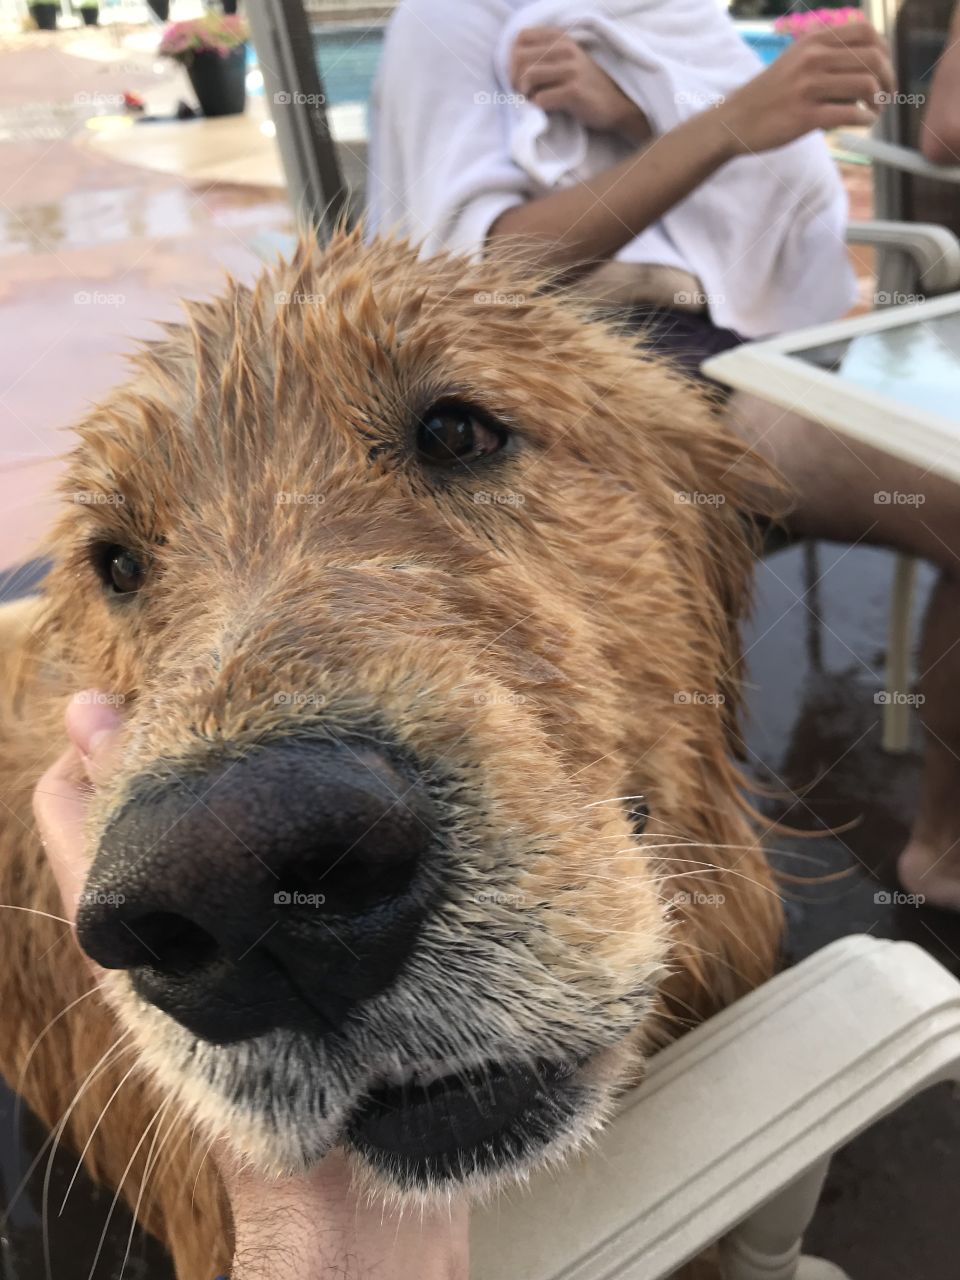 A wet dog so curious. Golden, furry and compassionate. With haste rushed to my lap